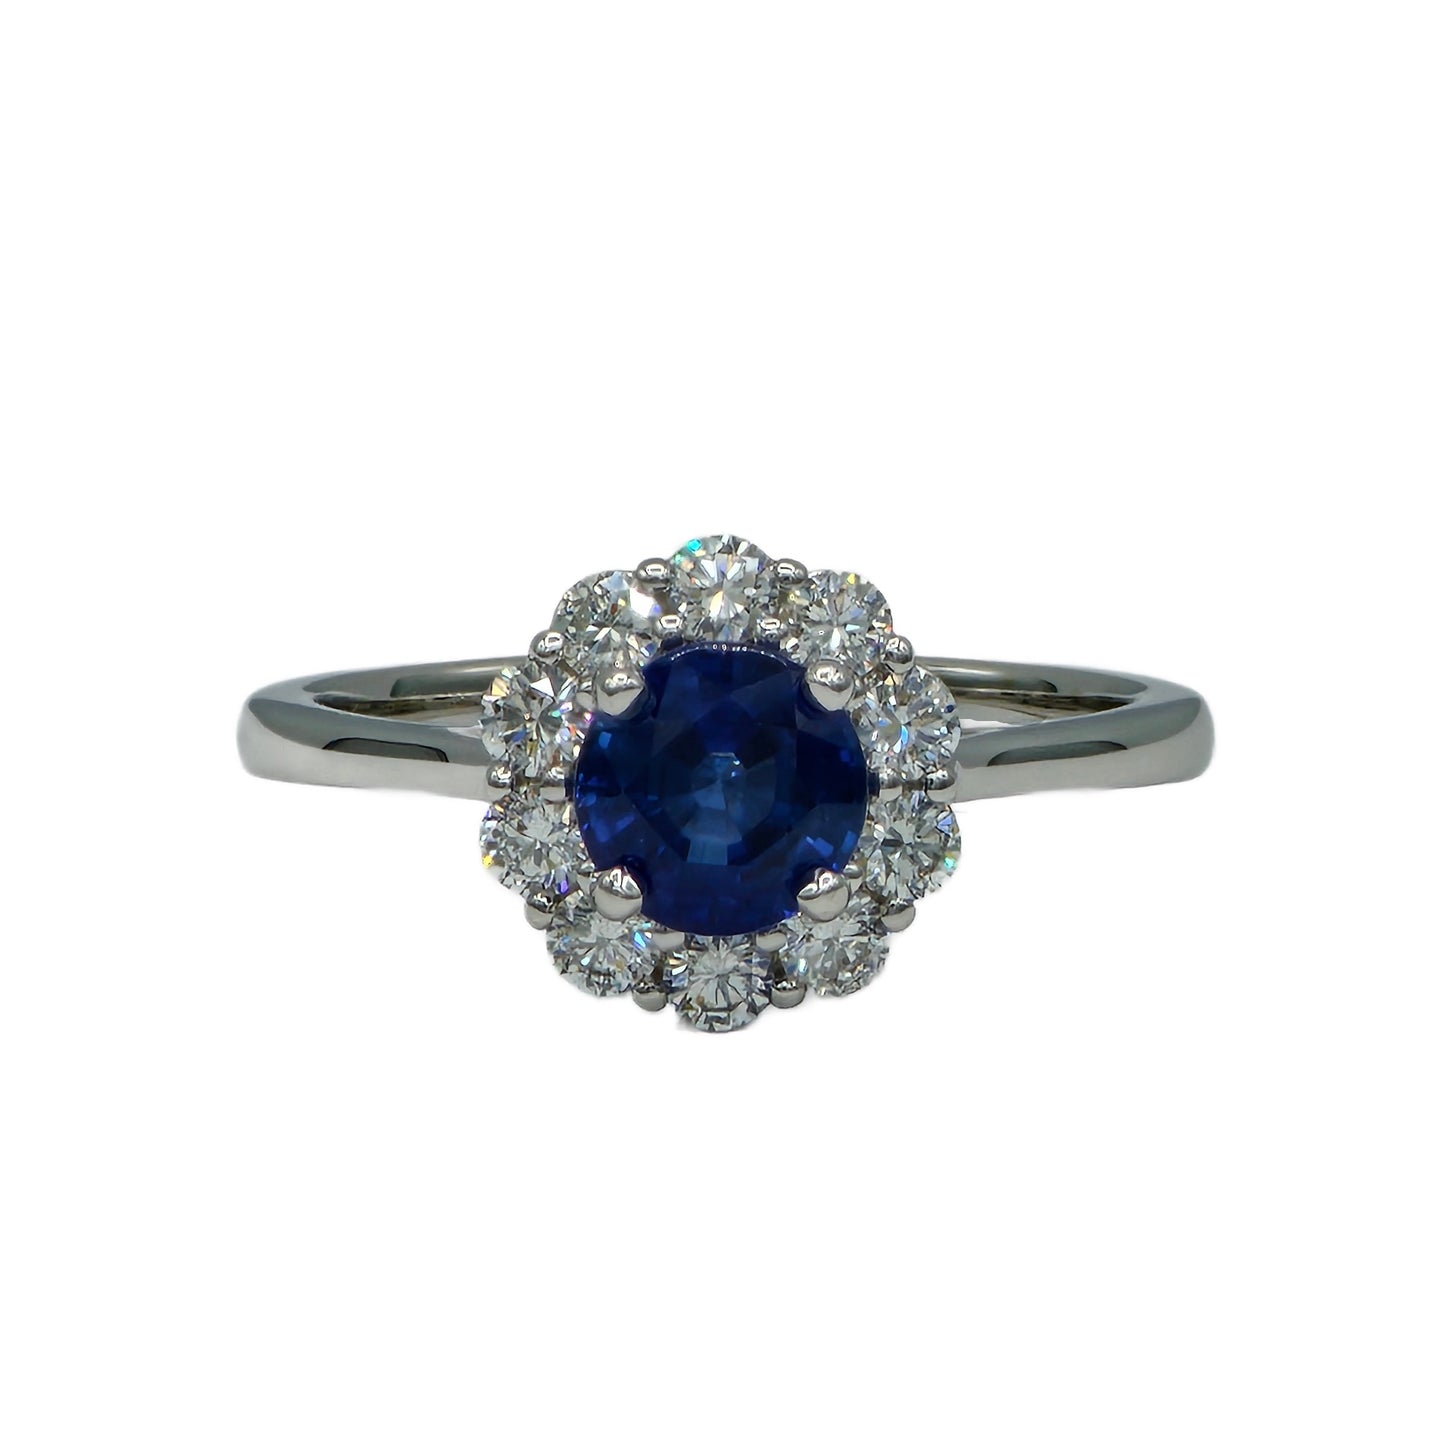 1.14 Carat Blue Sapphire and 10=0.50 Carat Diamond Ring in 14K White Gold